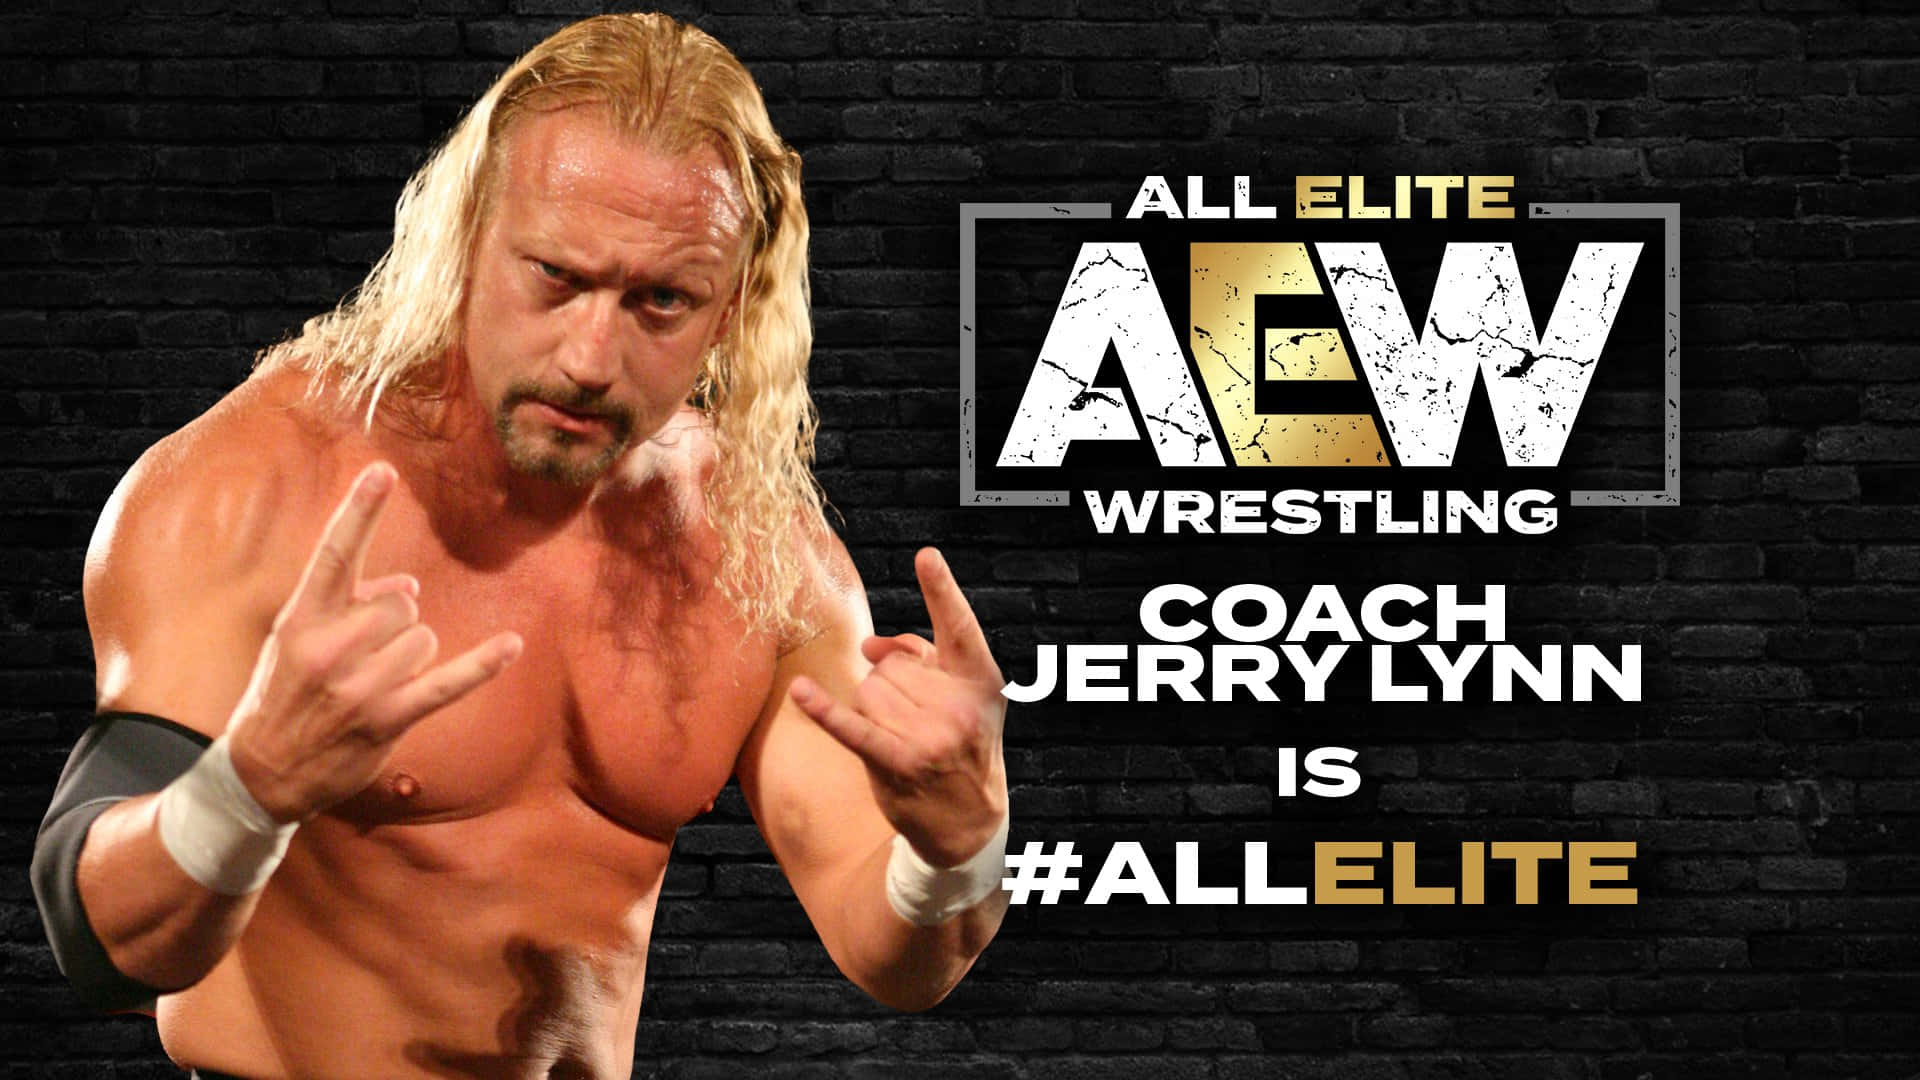 A Man With A Gun And The Words All Elite Aew Wrestling Coach Jerry Lynn Is All Elite Wallpaper